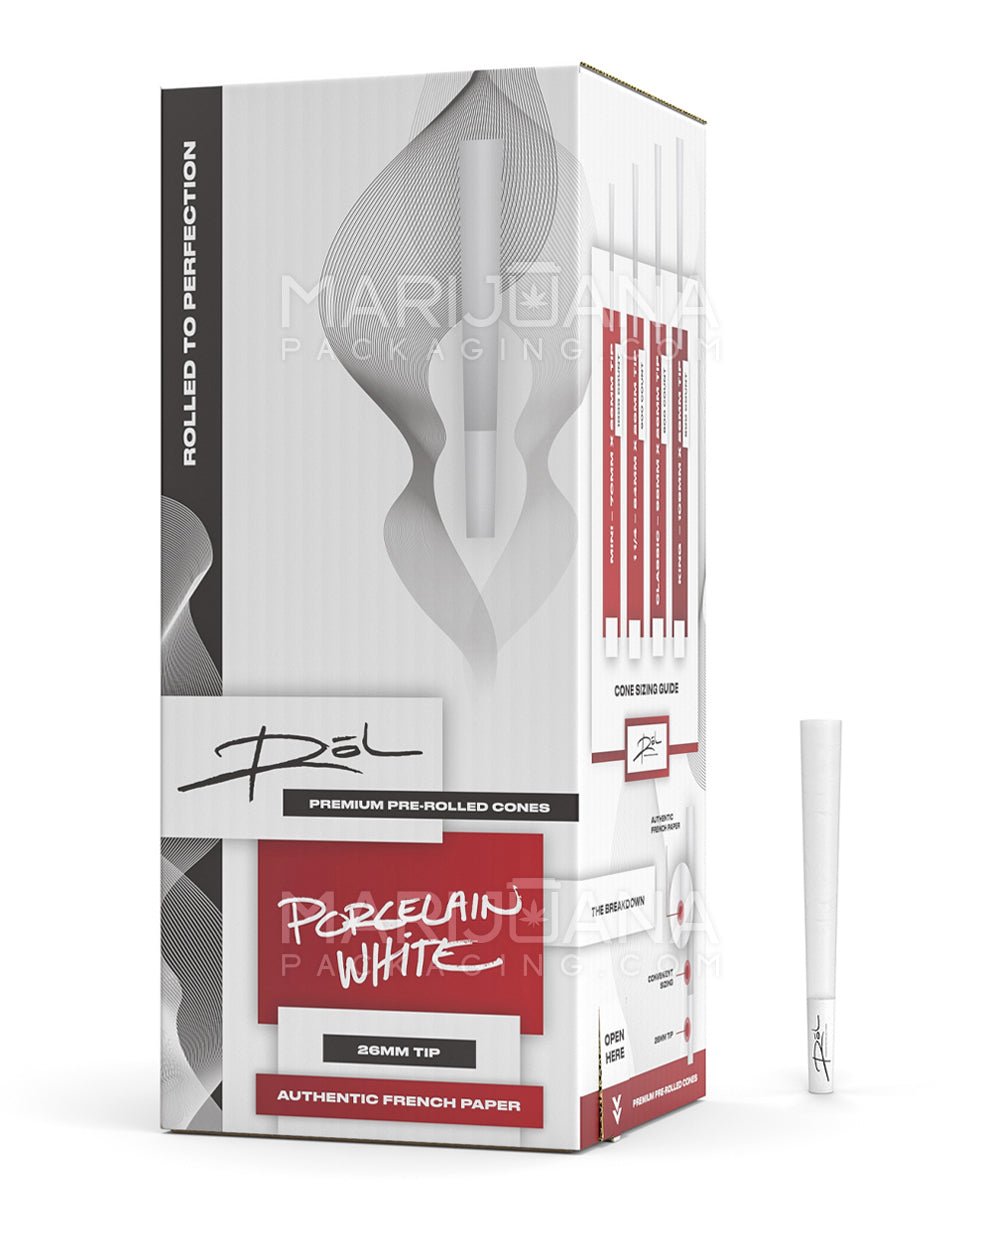 RōL | 1 1/4th Size Pre-Rolled Cones | 84mm - Porcelain White Paper - 900 Count - 1